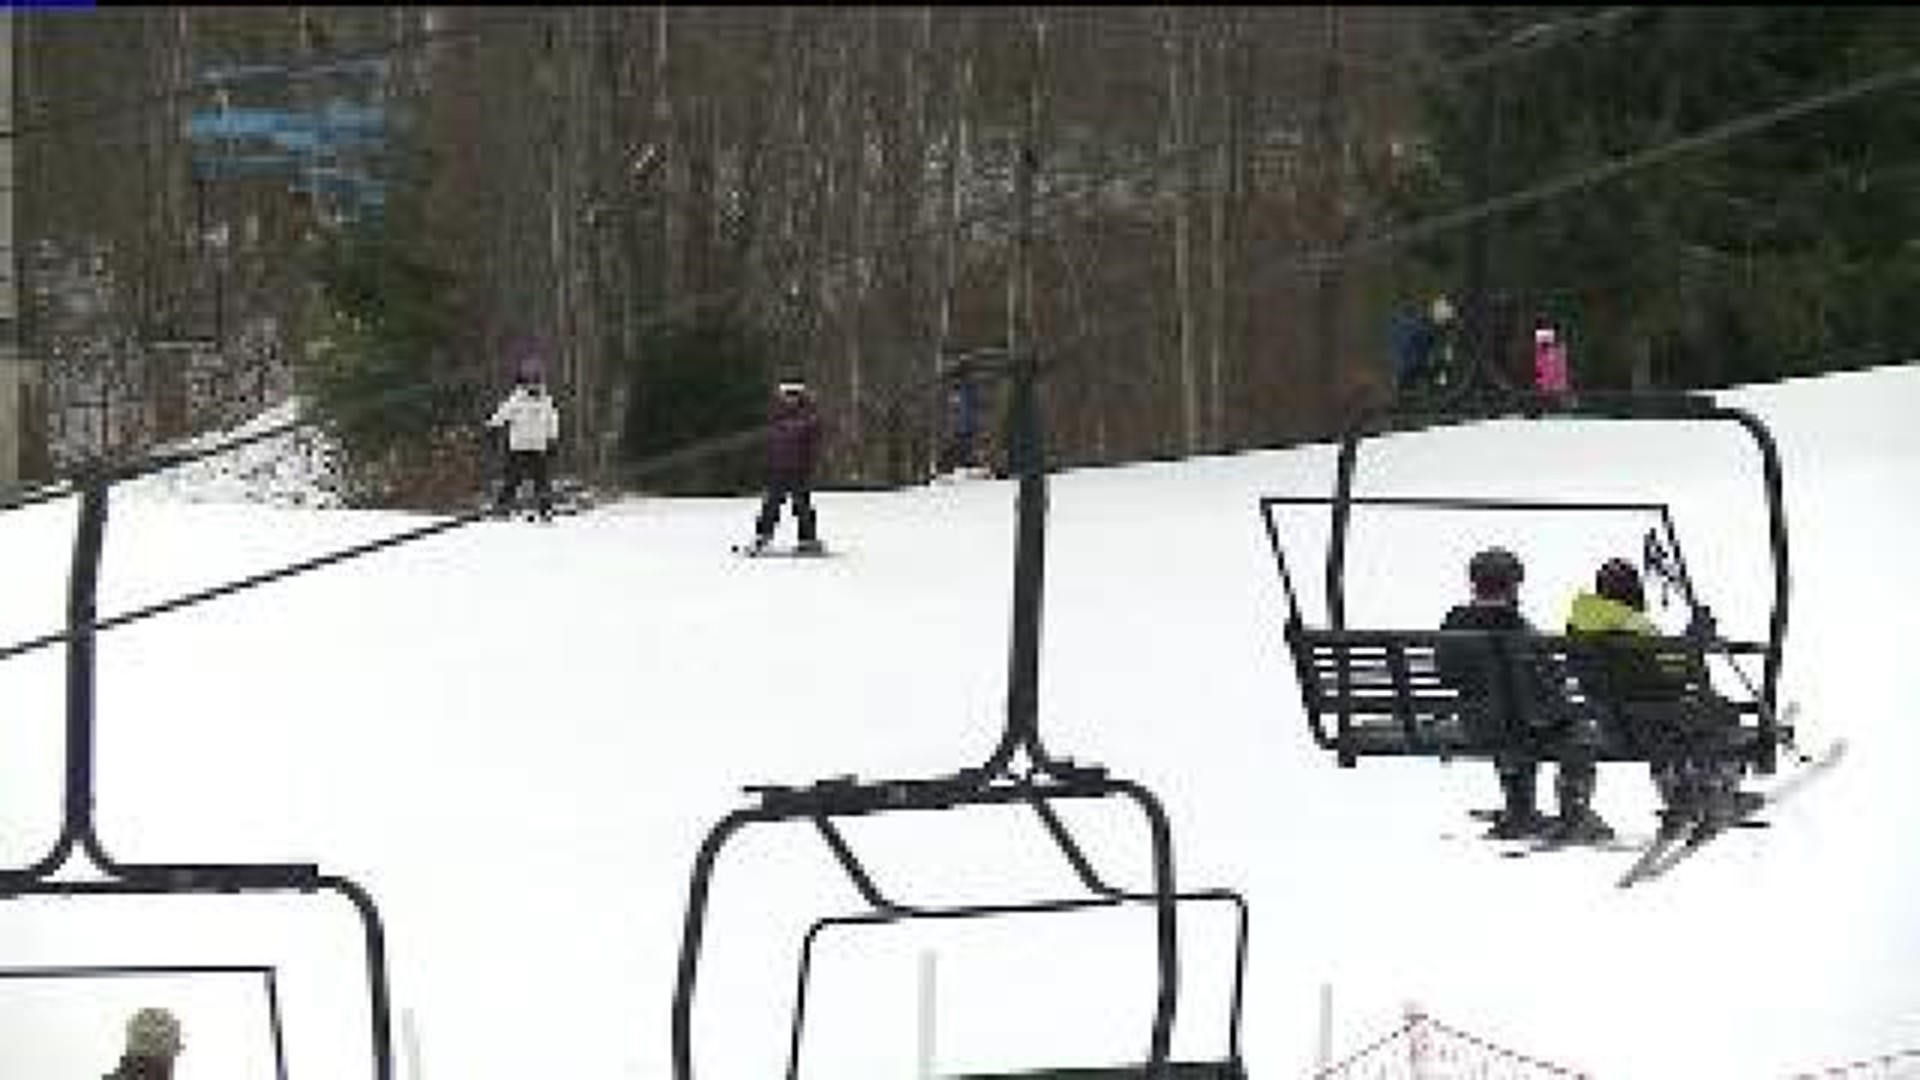 Holiday Means Boost for Ski Area